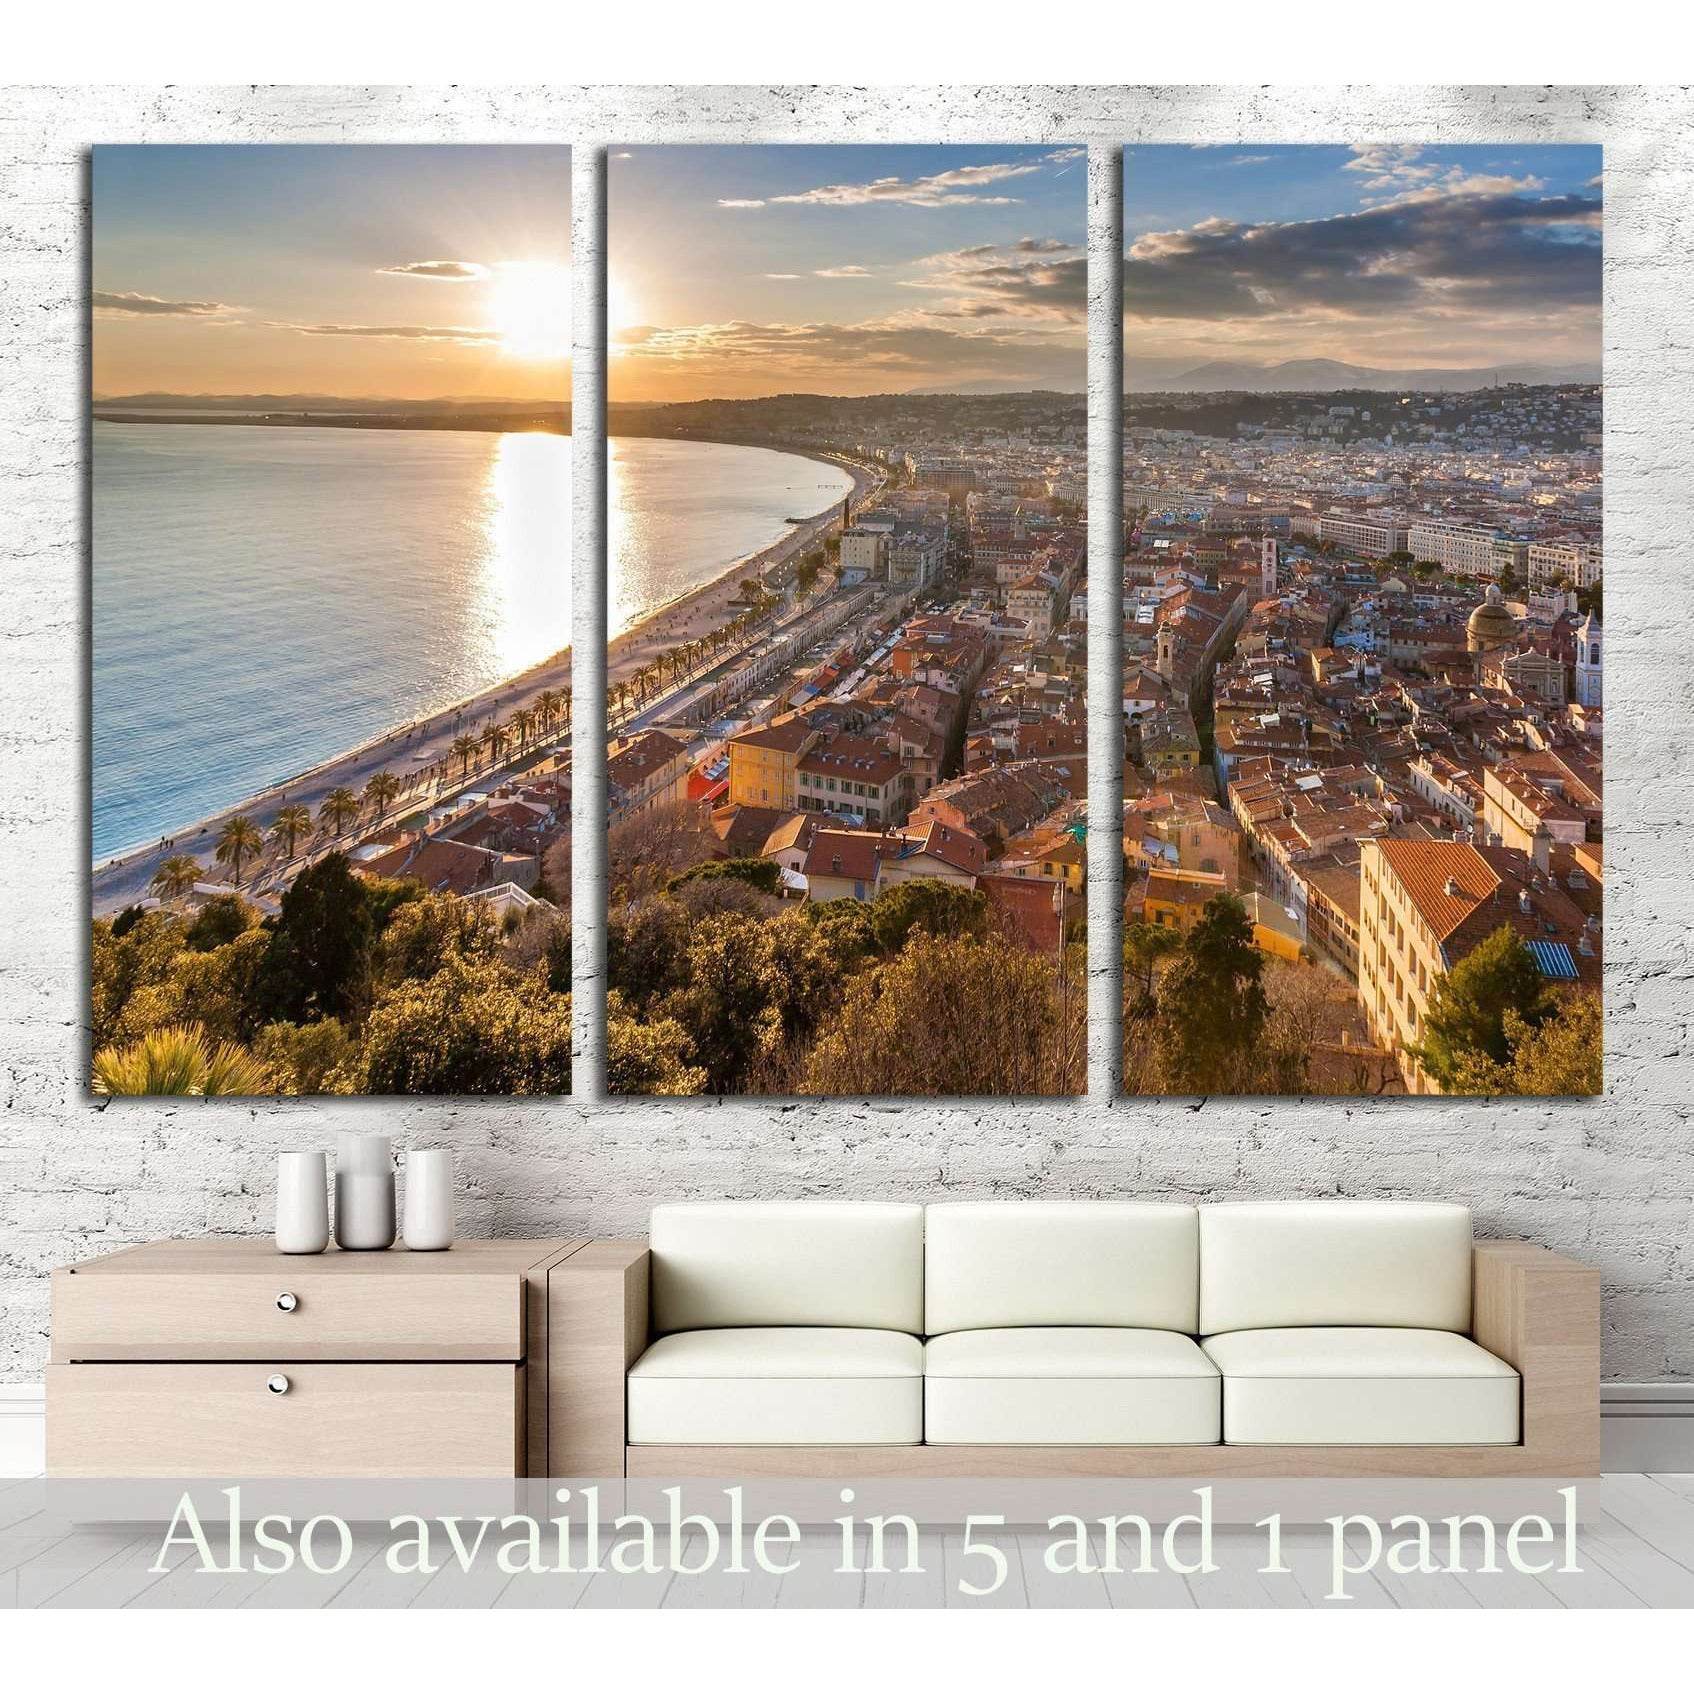 View of Nice city - Cote d'Azur - France №2259 Ready to Hang Canvas Print